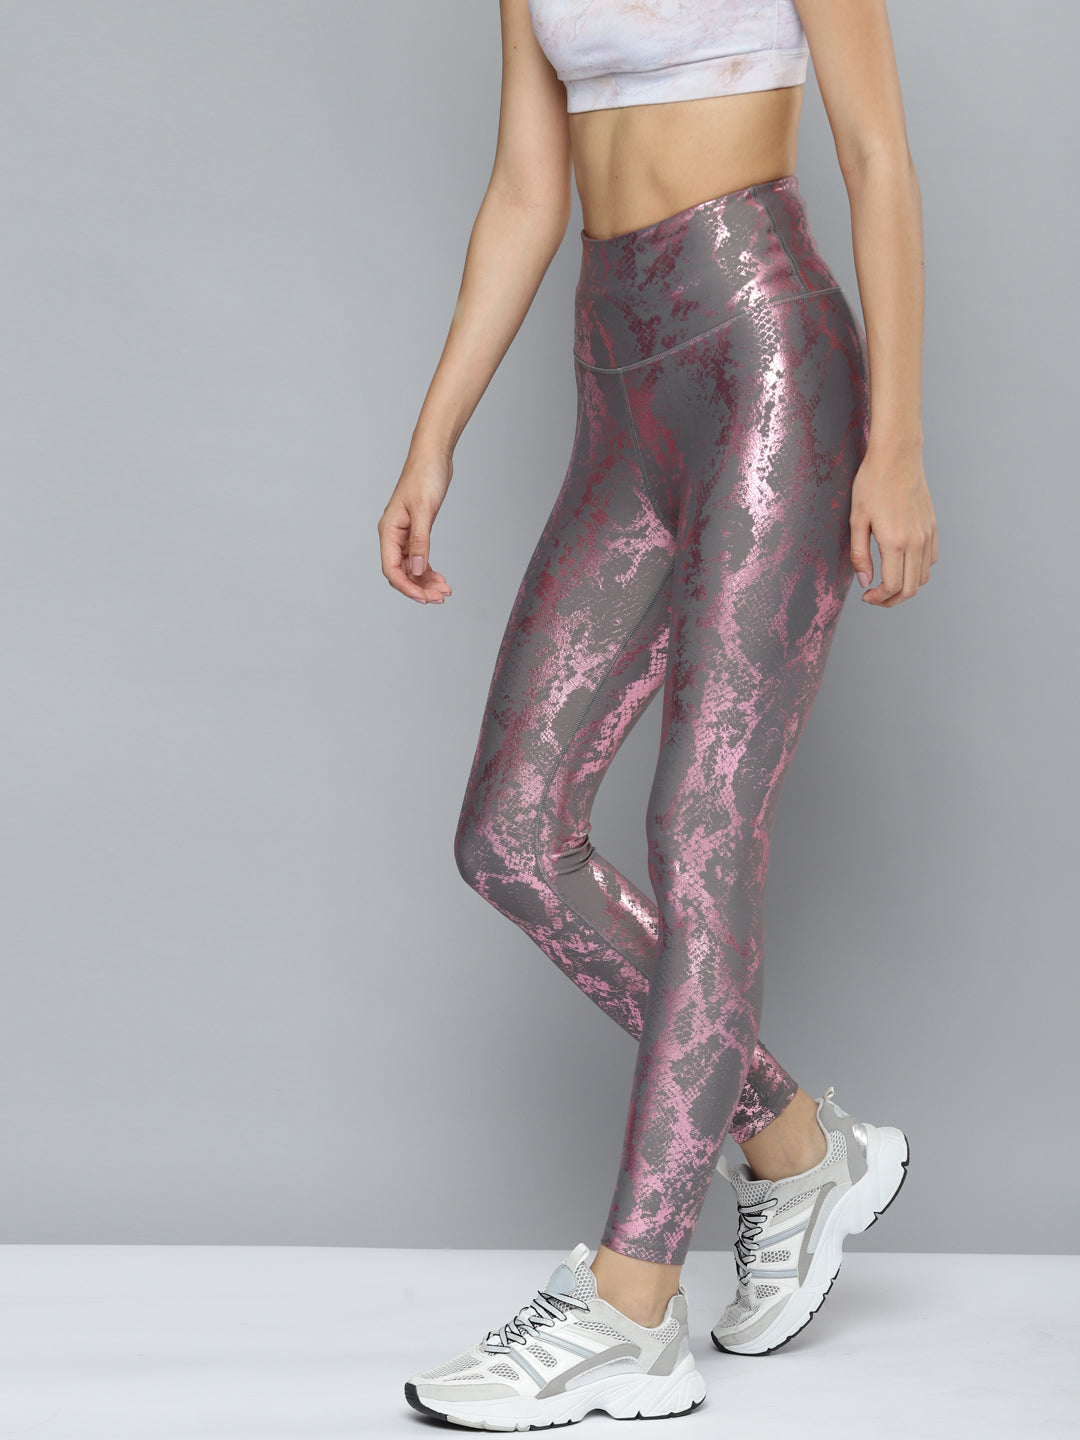 Tommie Copper® Leggings With Back Support | Buy Now